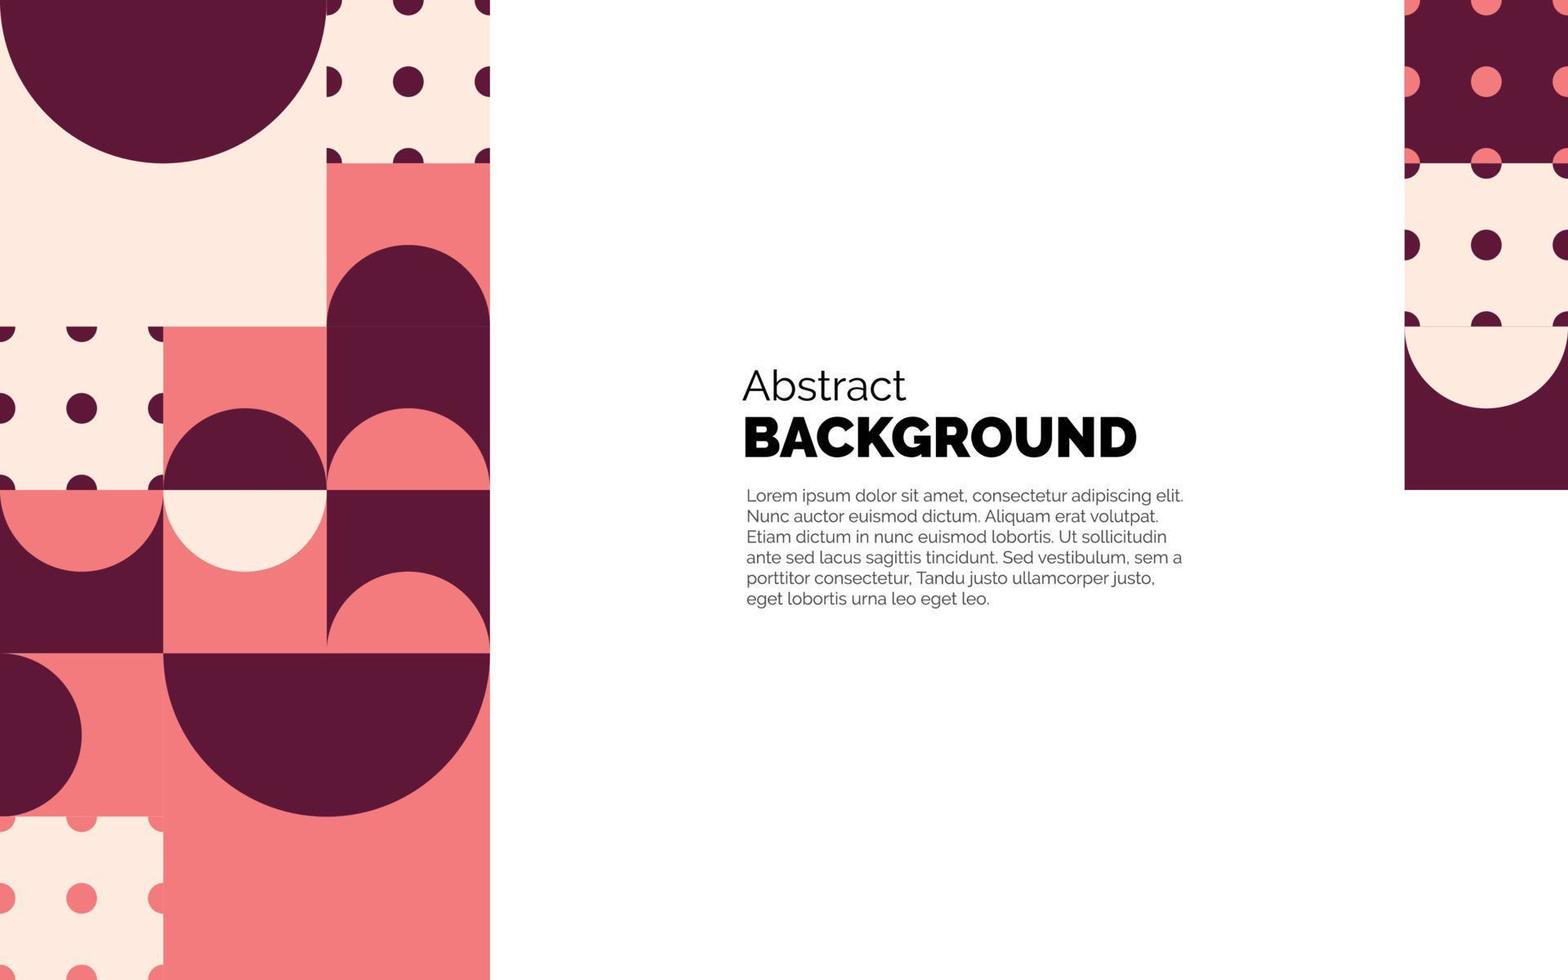 Geometrical abstract background Vector illustration